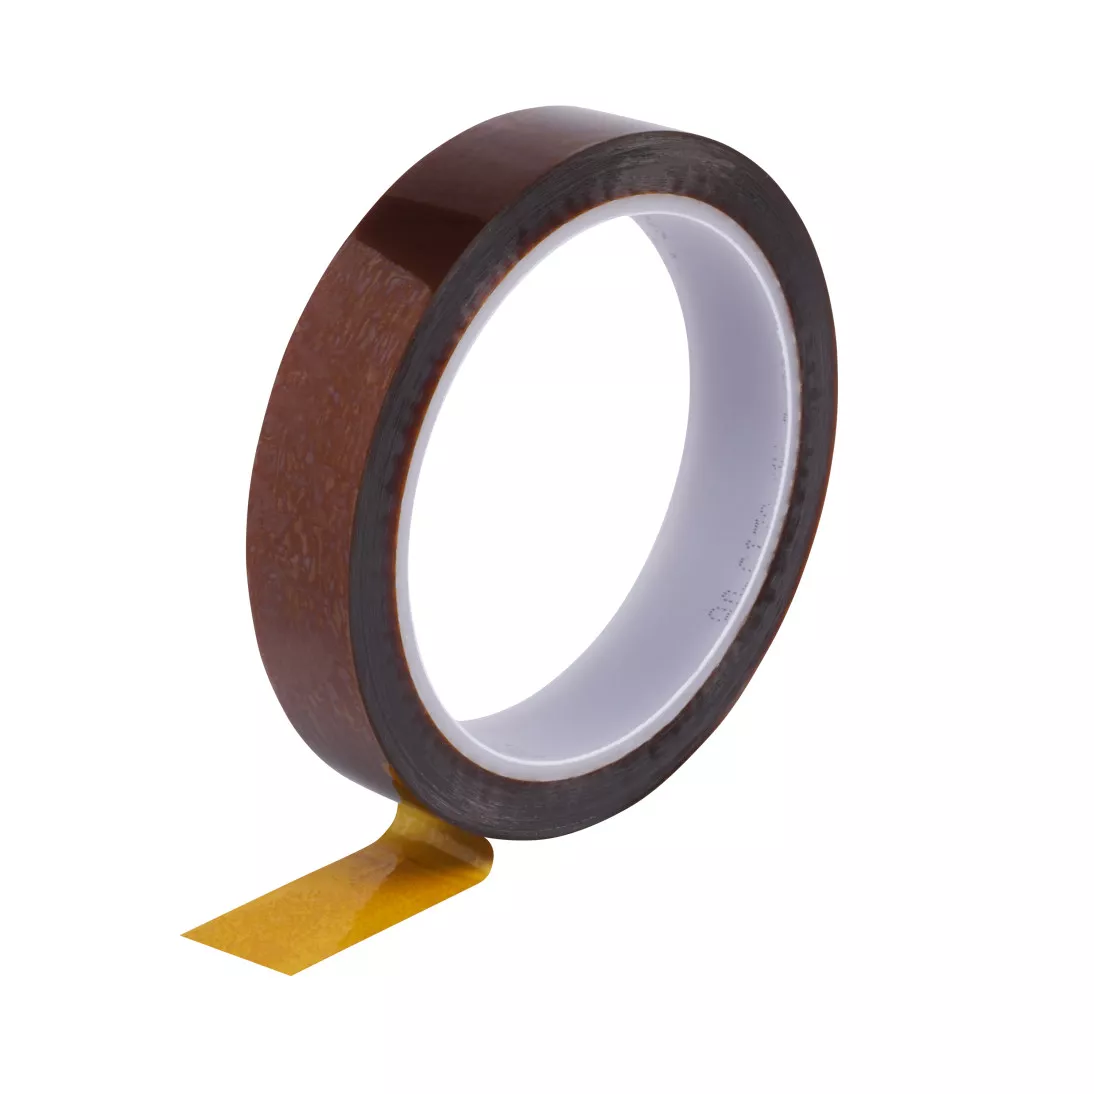 3M™ Polyimide Film Electrical Tape 1205, 9 mm x 33 m, 26 Rolls/Case